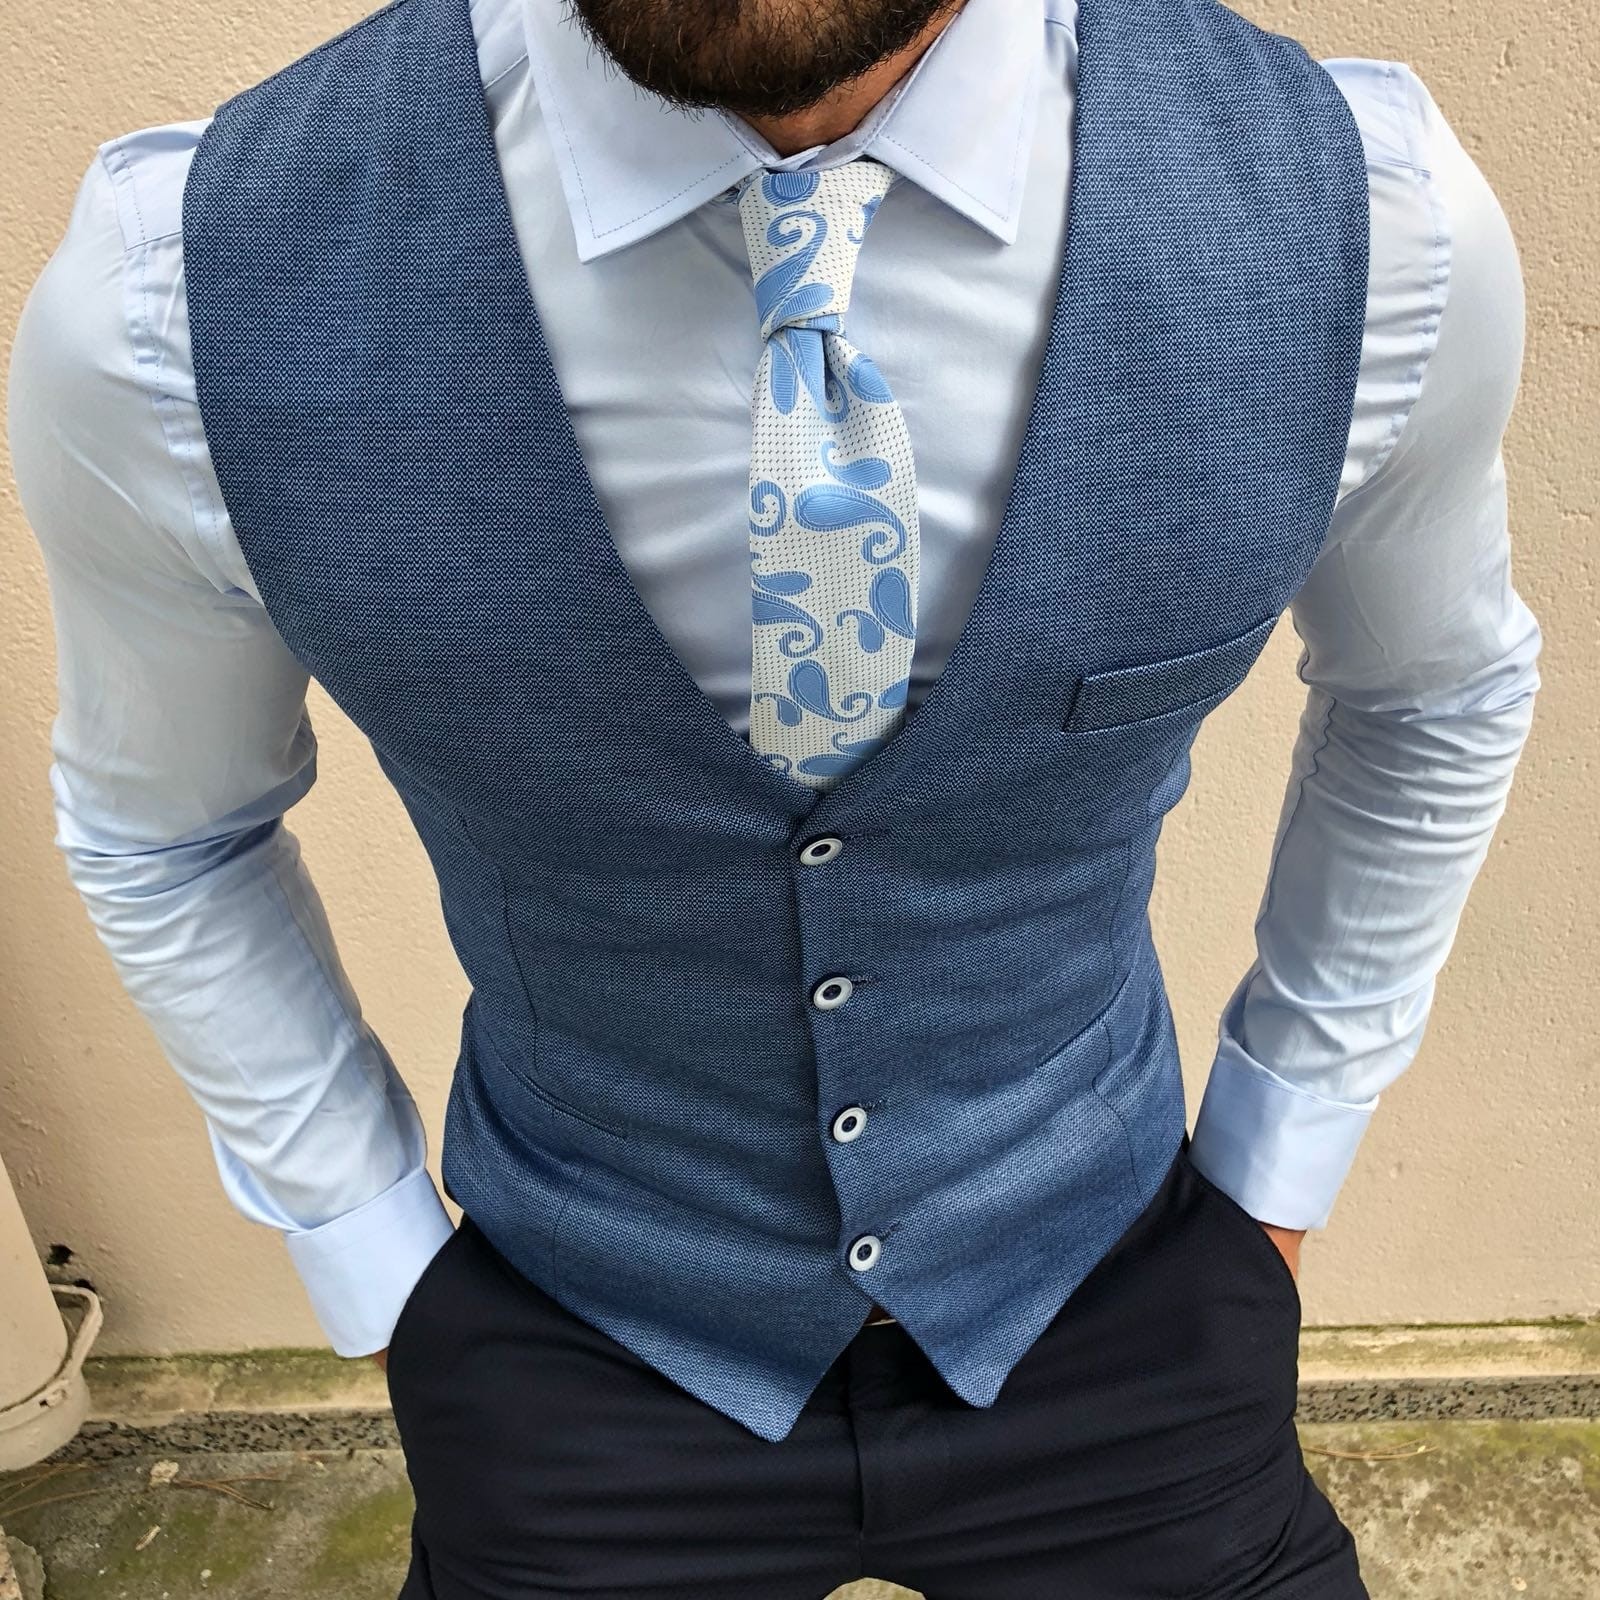 Buy Blue Slim Fit Vest by Gentwith.com with Free Shipping